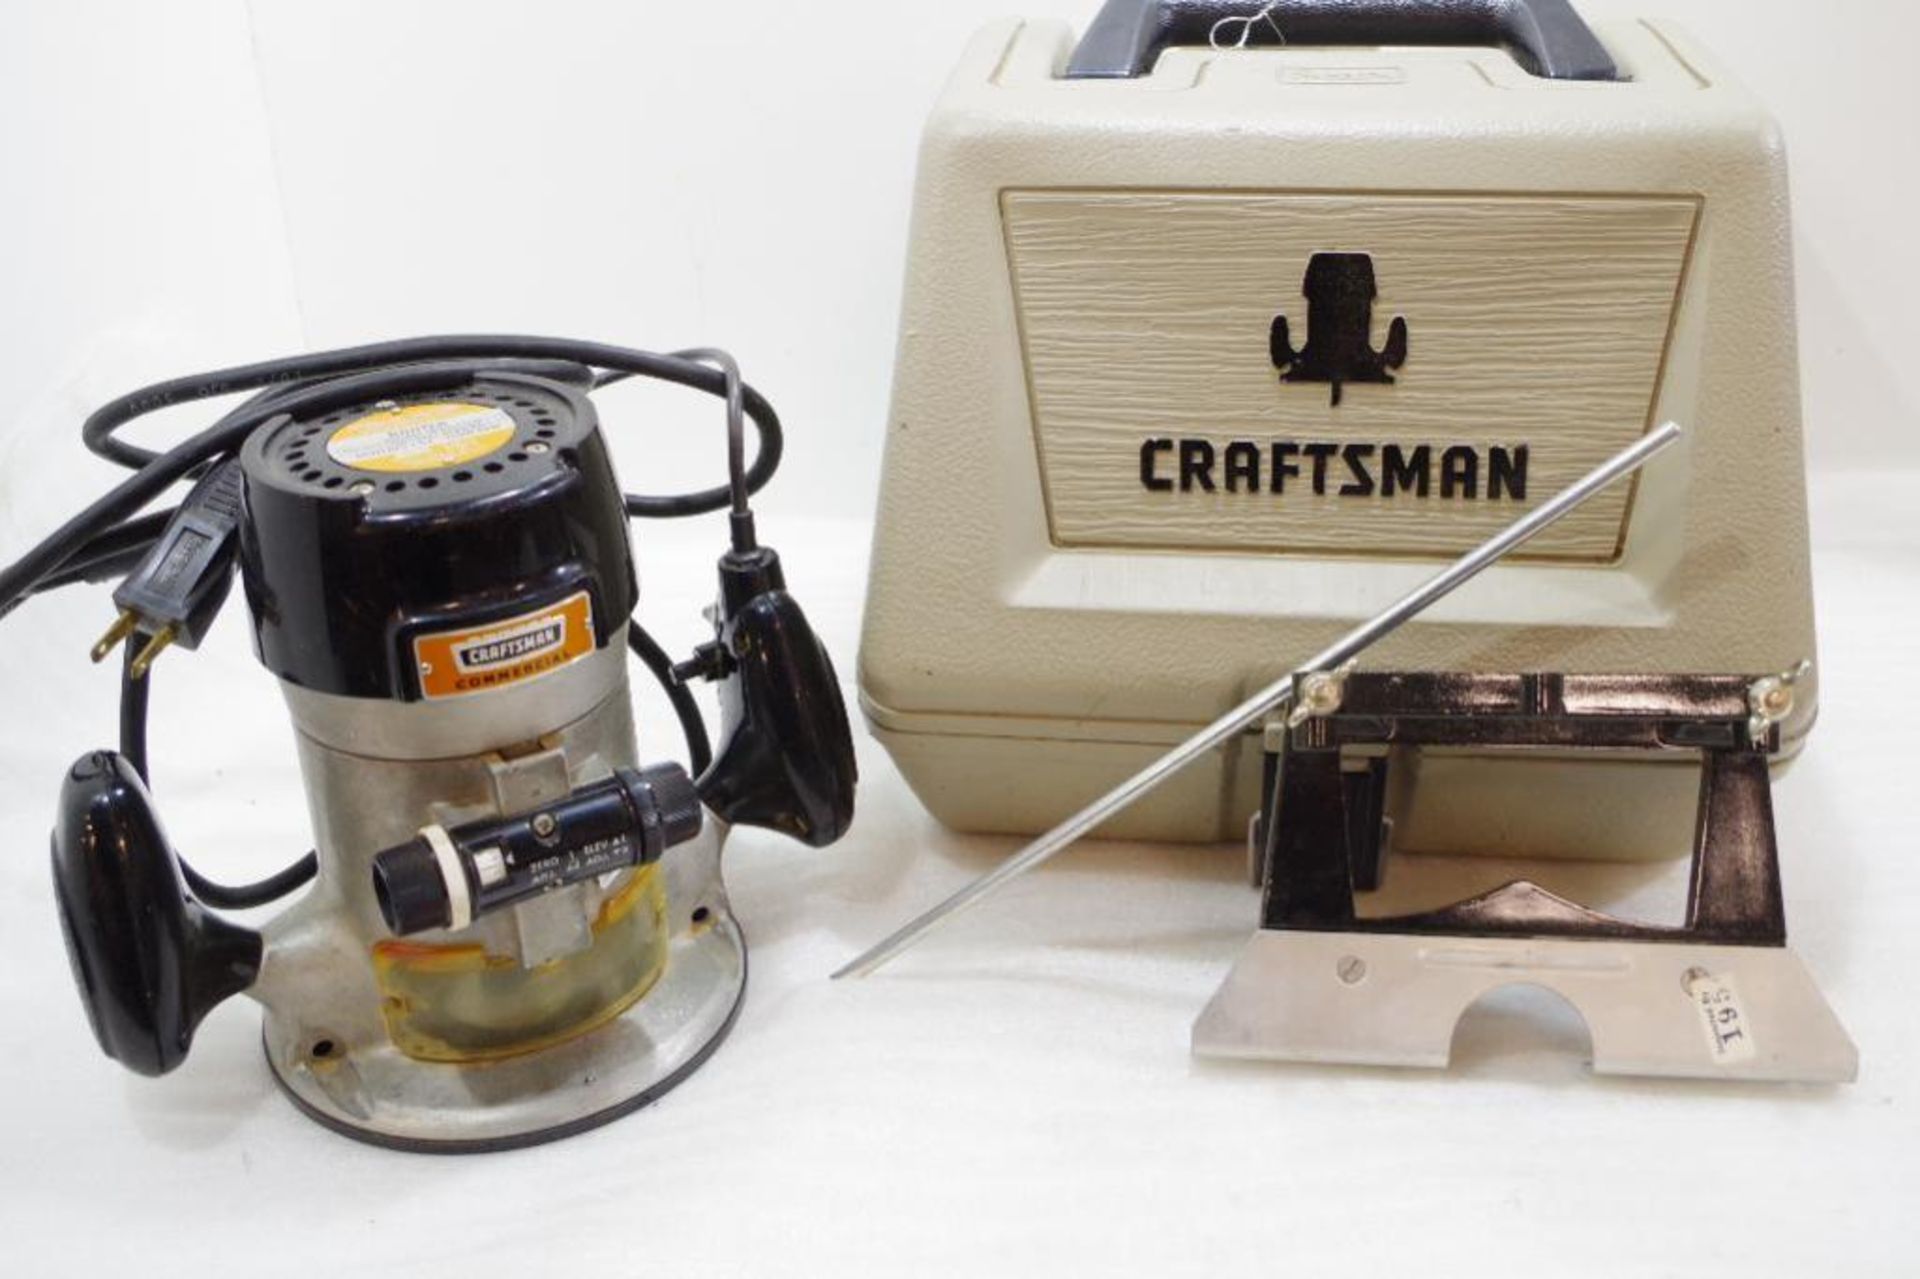 CRAFTSMAN 120V Double Insulated Router M/N 315.17380 w/ Tool Case Made in USA